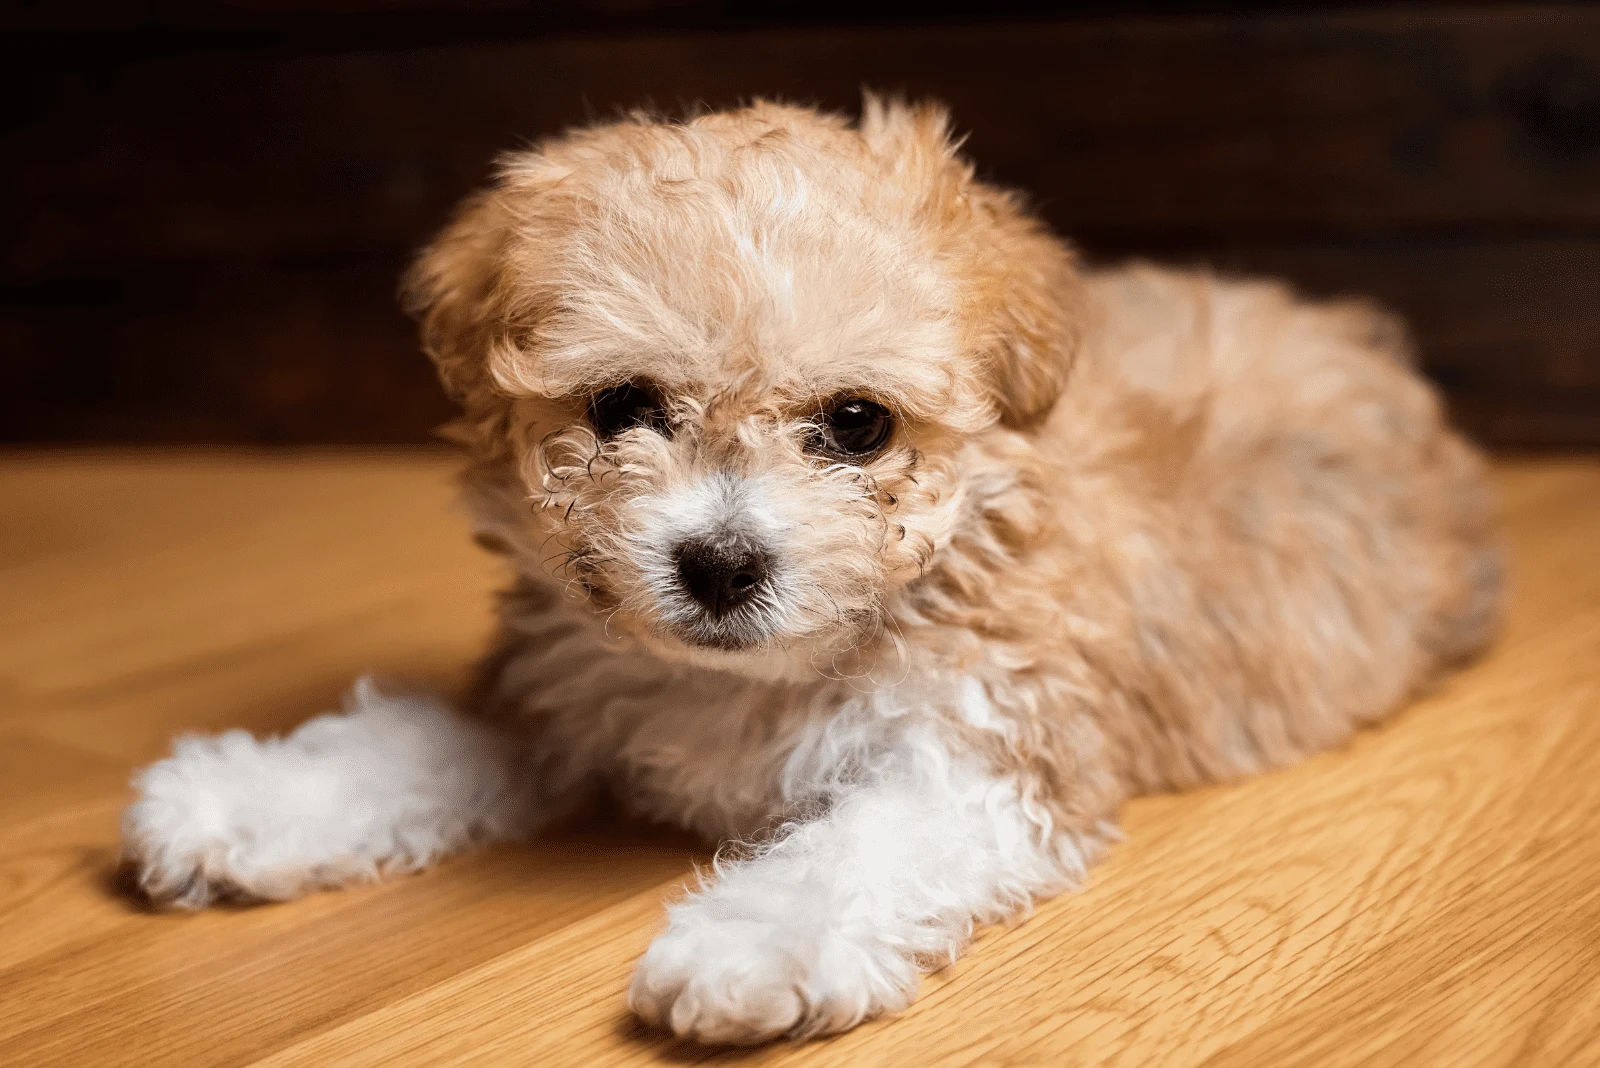 the adorable Maltipoo lies on the laminate